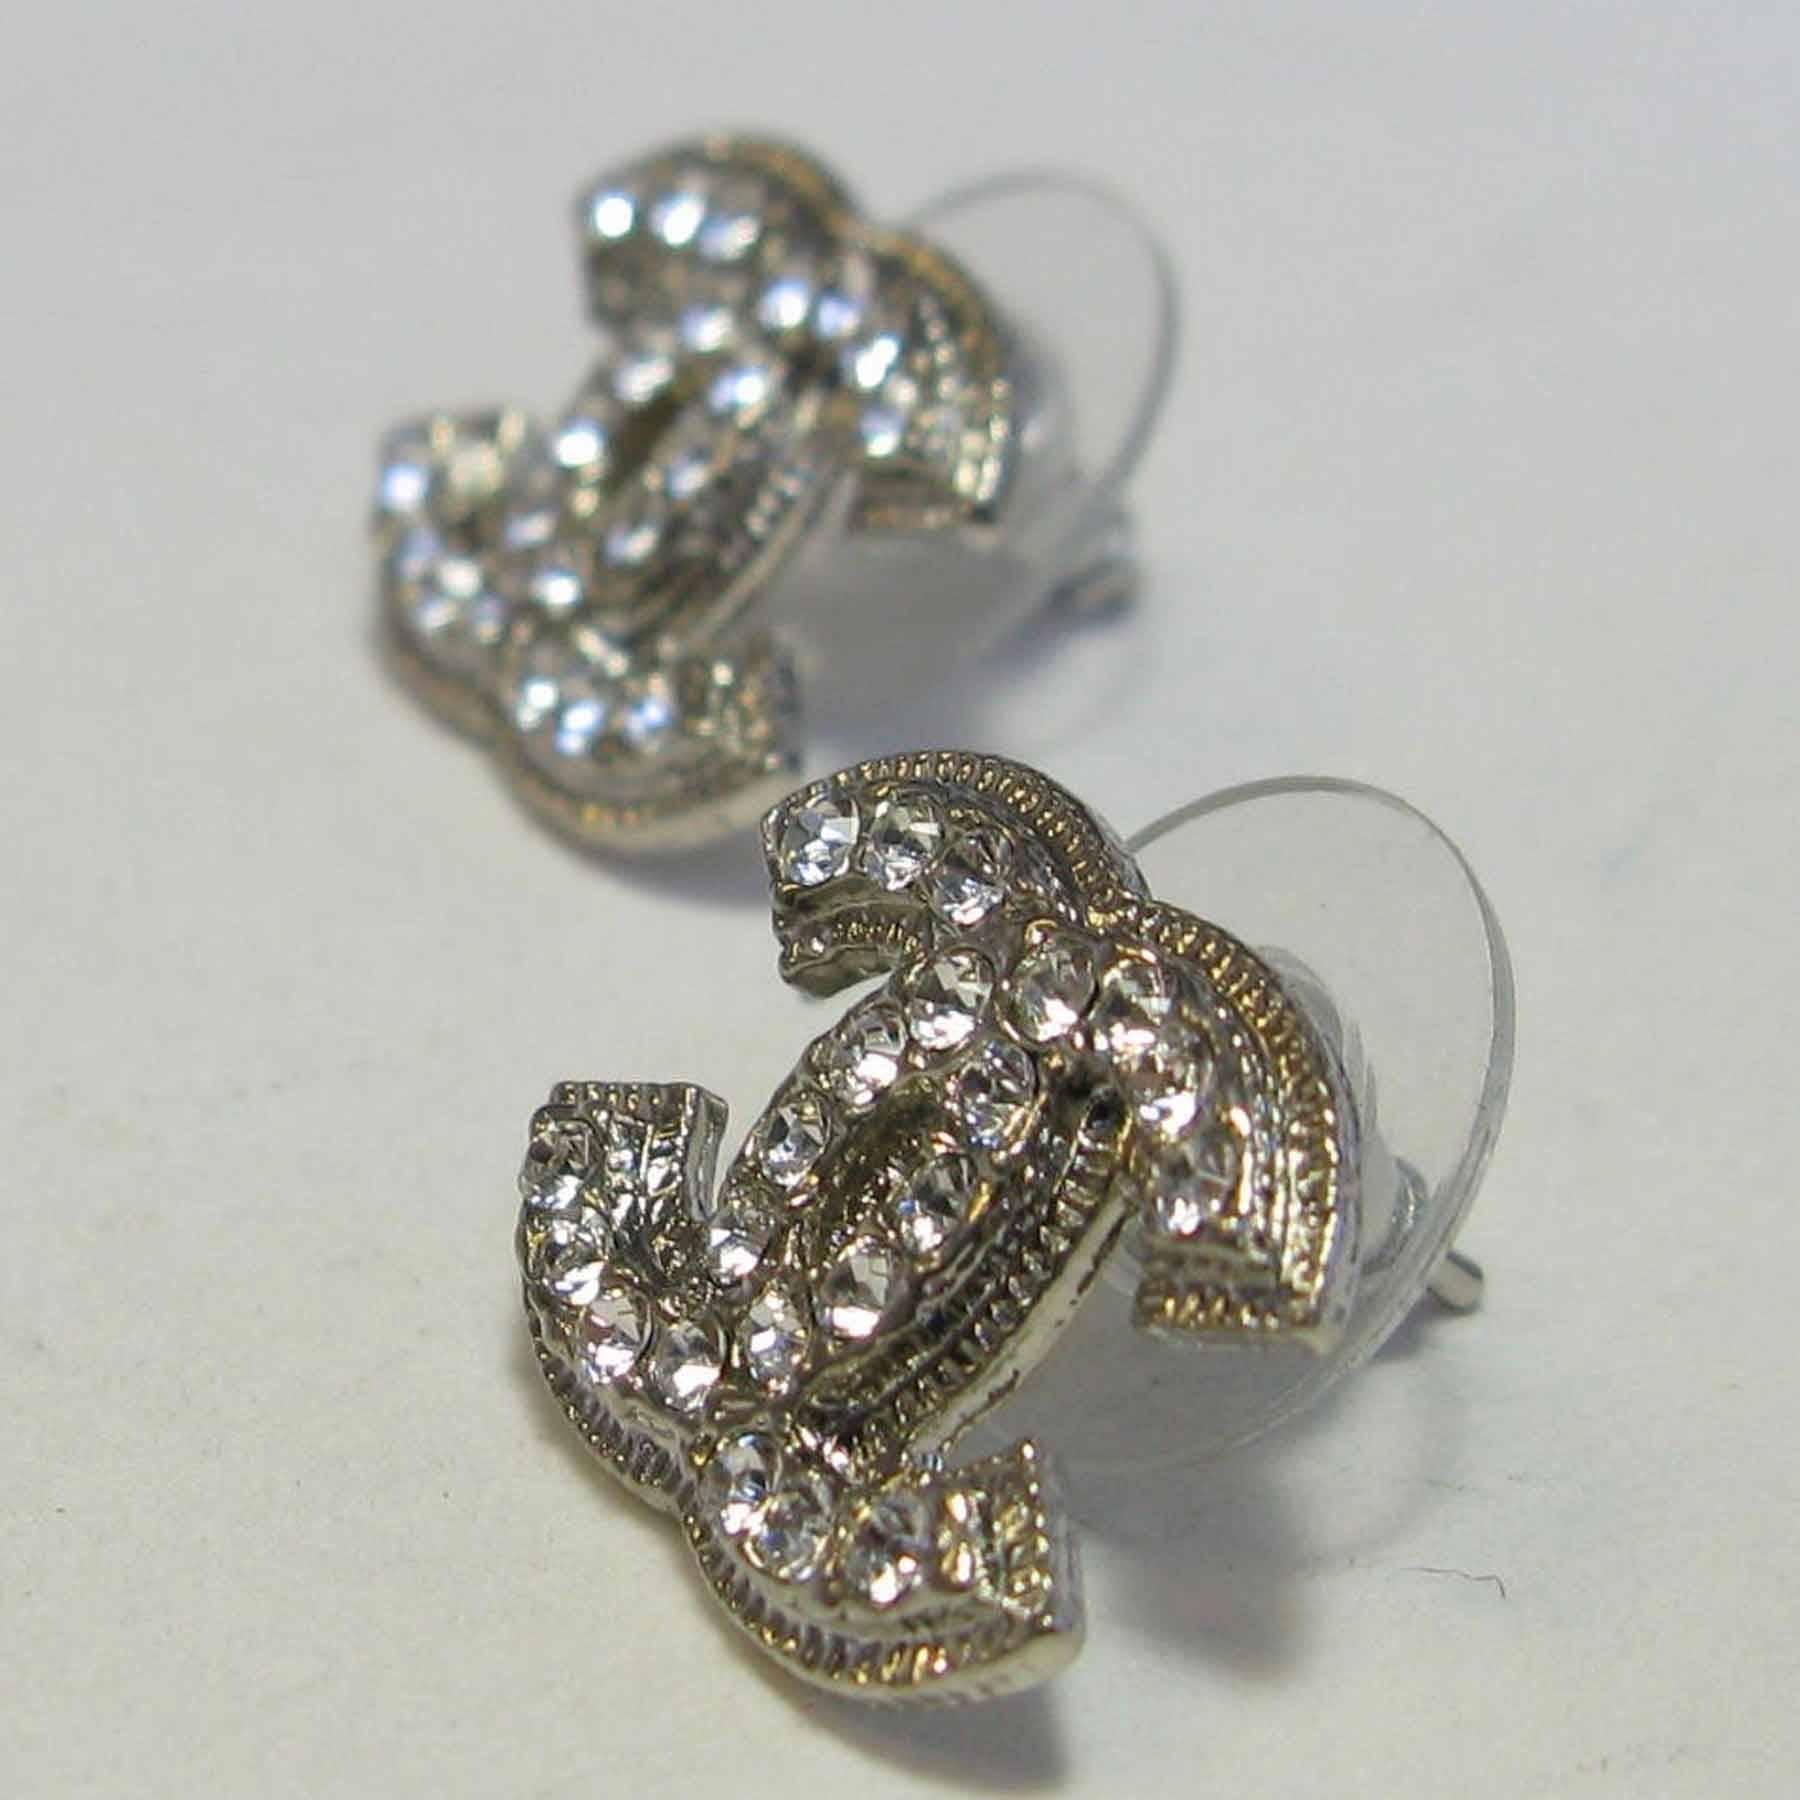 Women's Chanel Earrings in Rhinestones and Silver Plated Metal